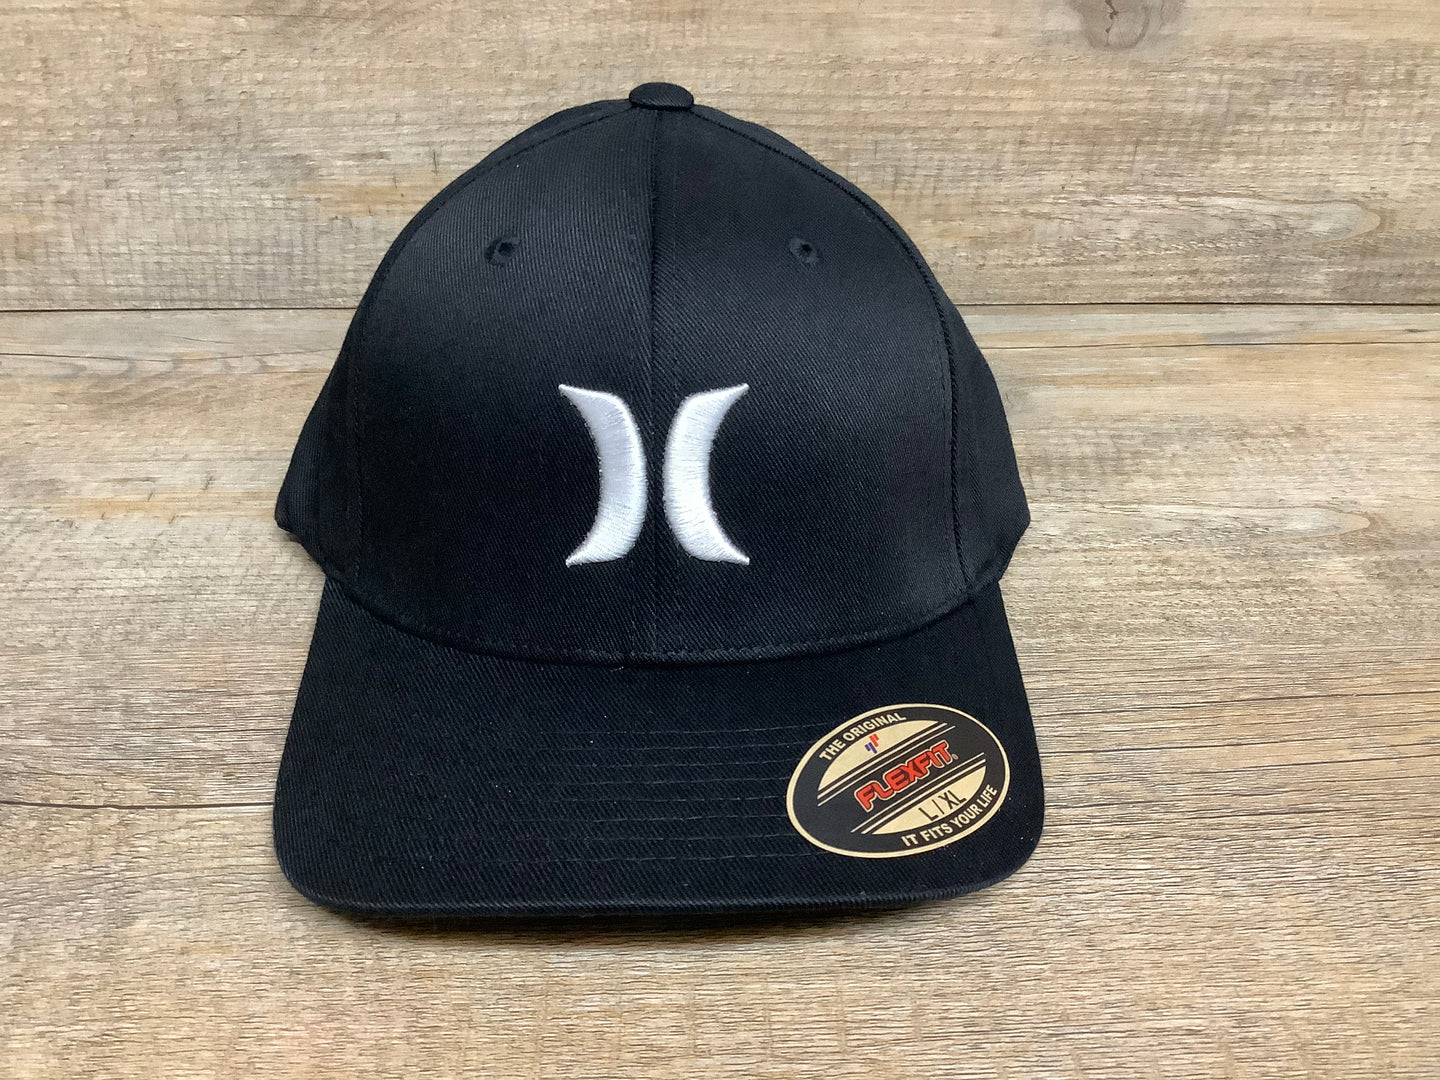 Hurley - One & Only Hat